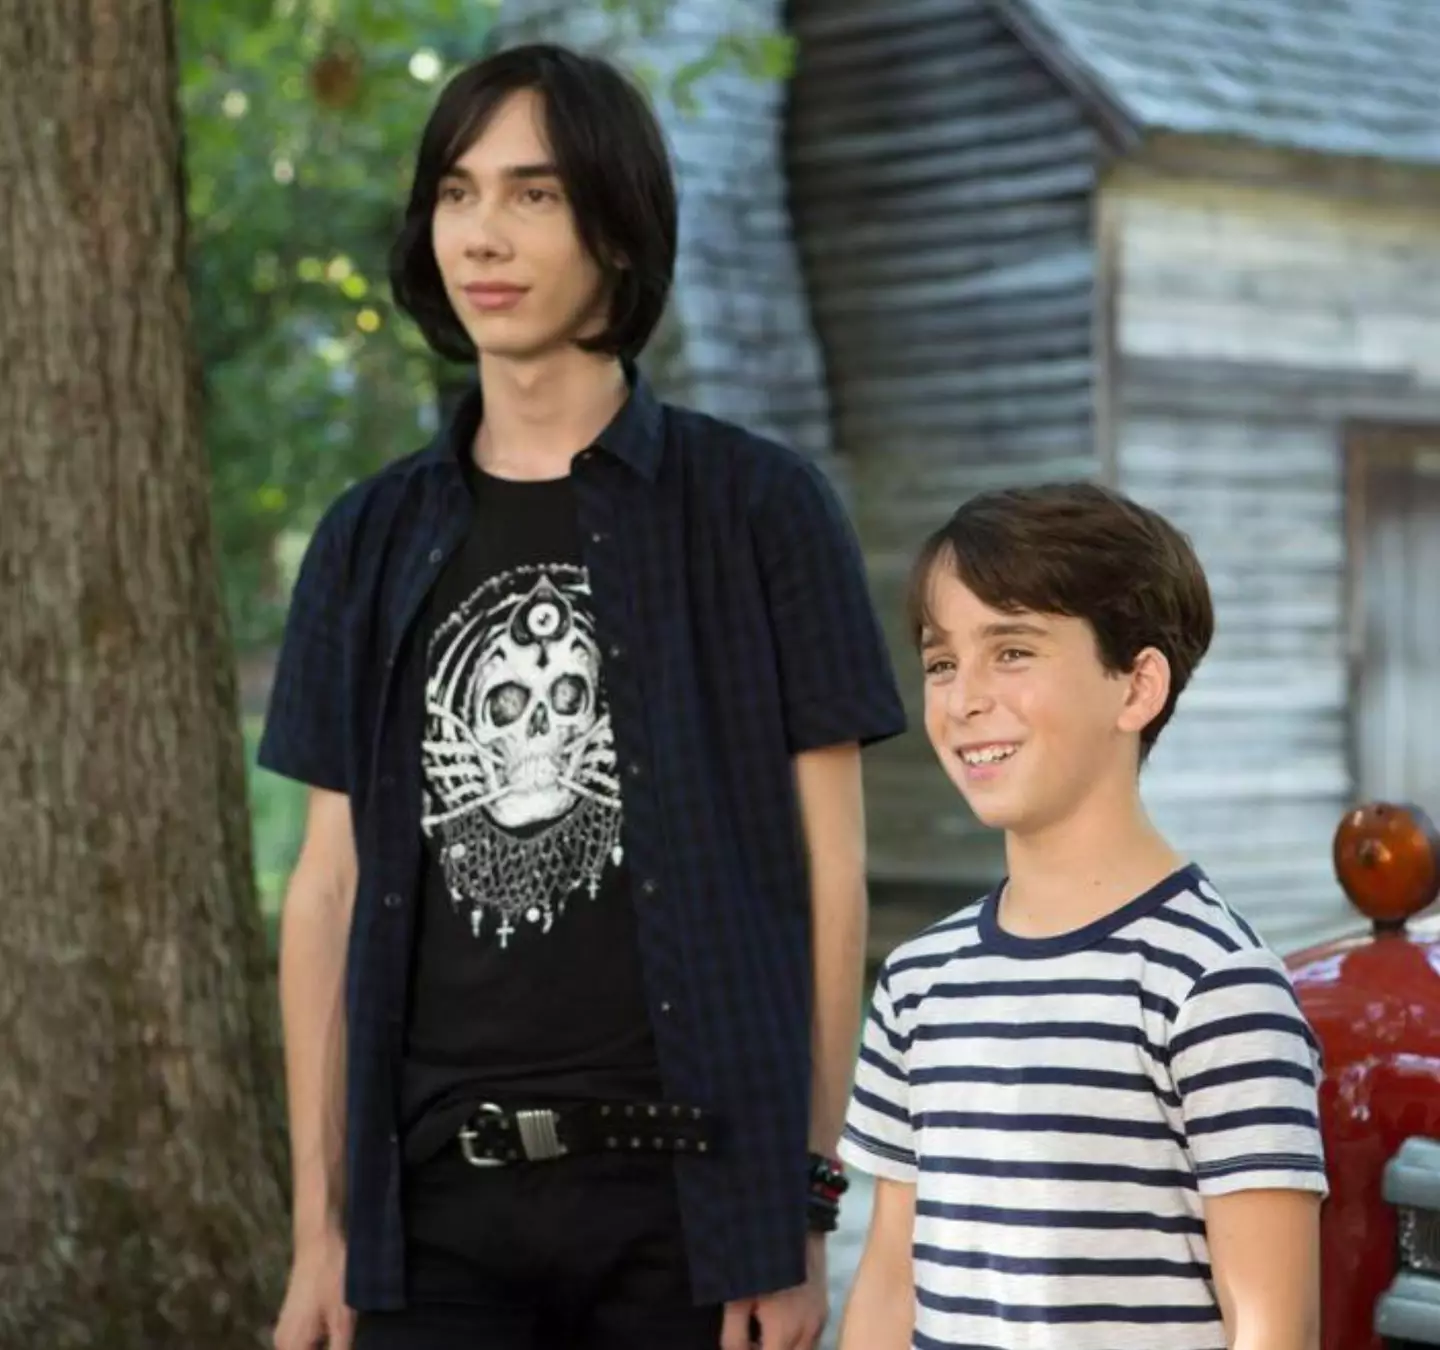 Wright in the adaptation of Diary of a Wimpy Kid.